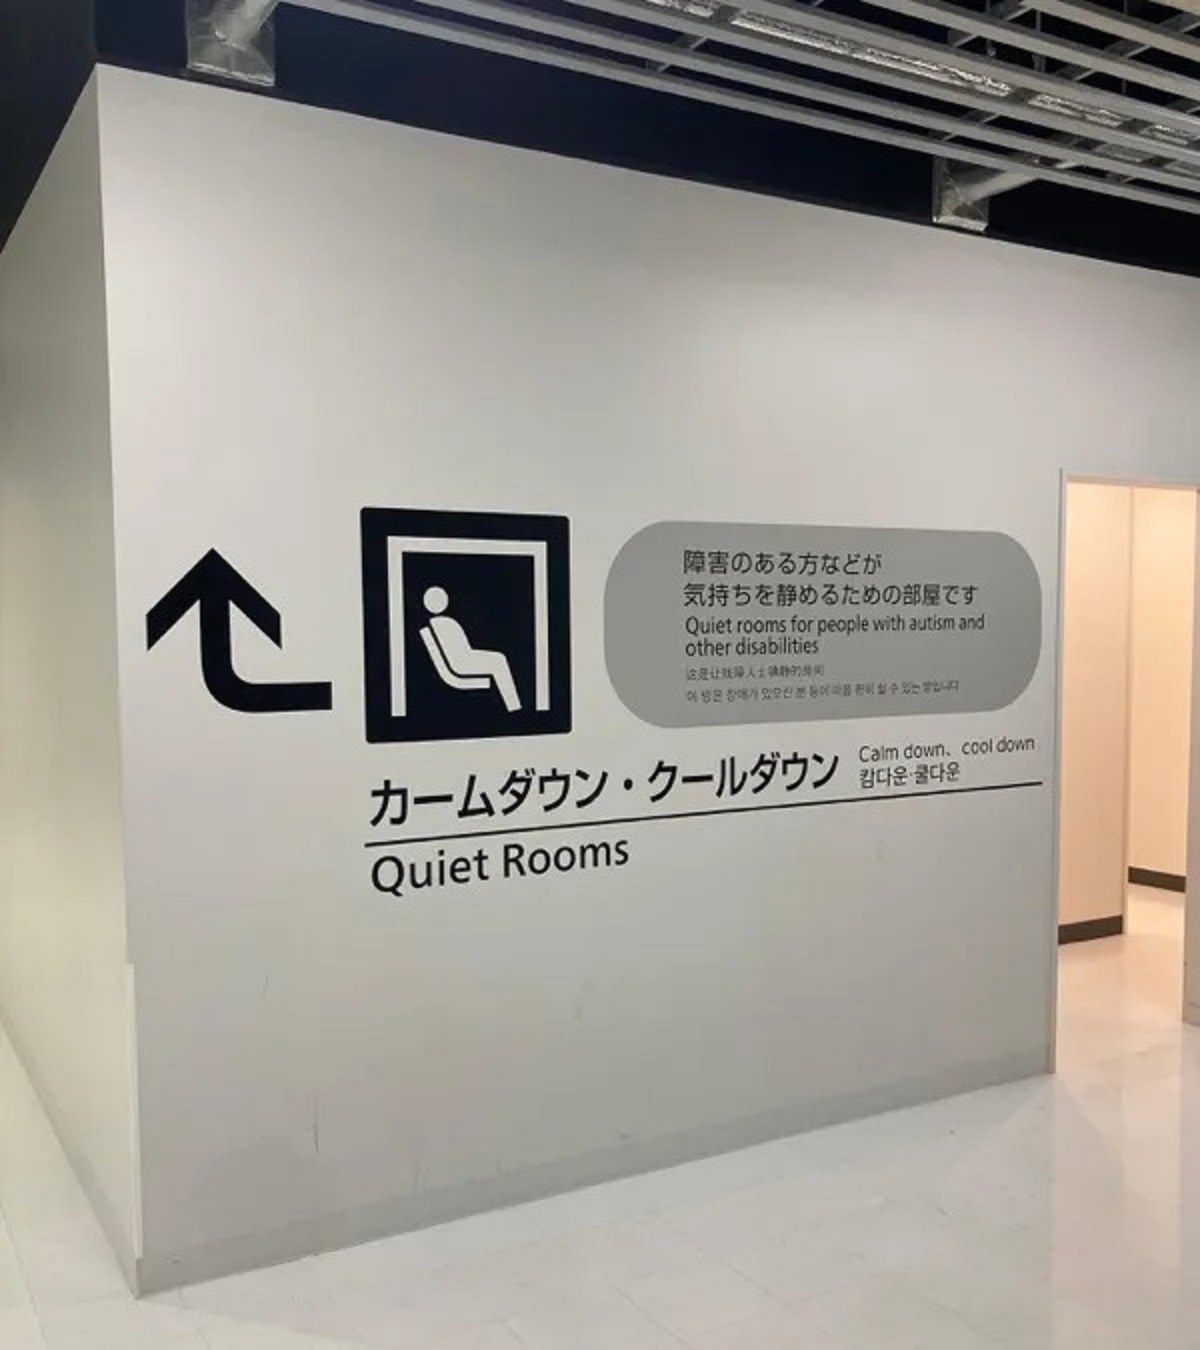 This quiet room at Narita airport for people with autism.